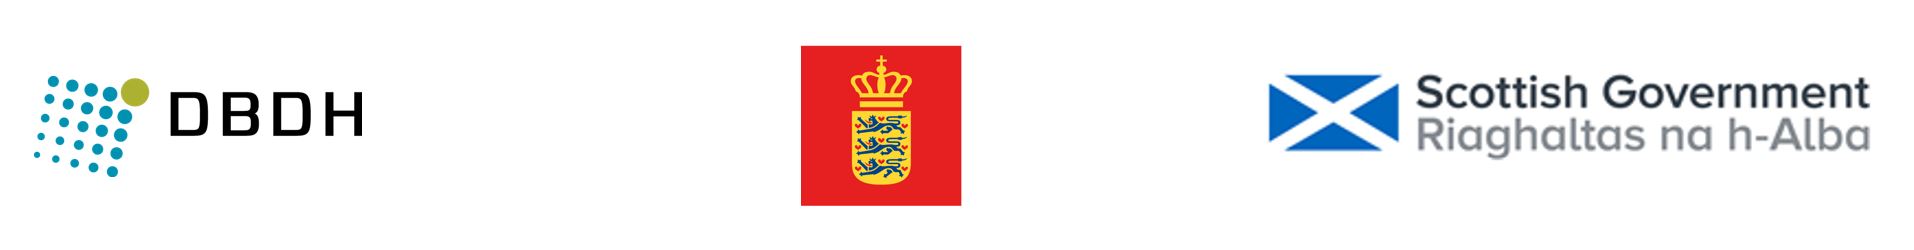 Danish Board of District Heating, the Royal Danish Embassy and Scottish Government logos